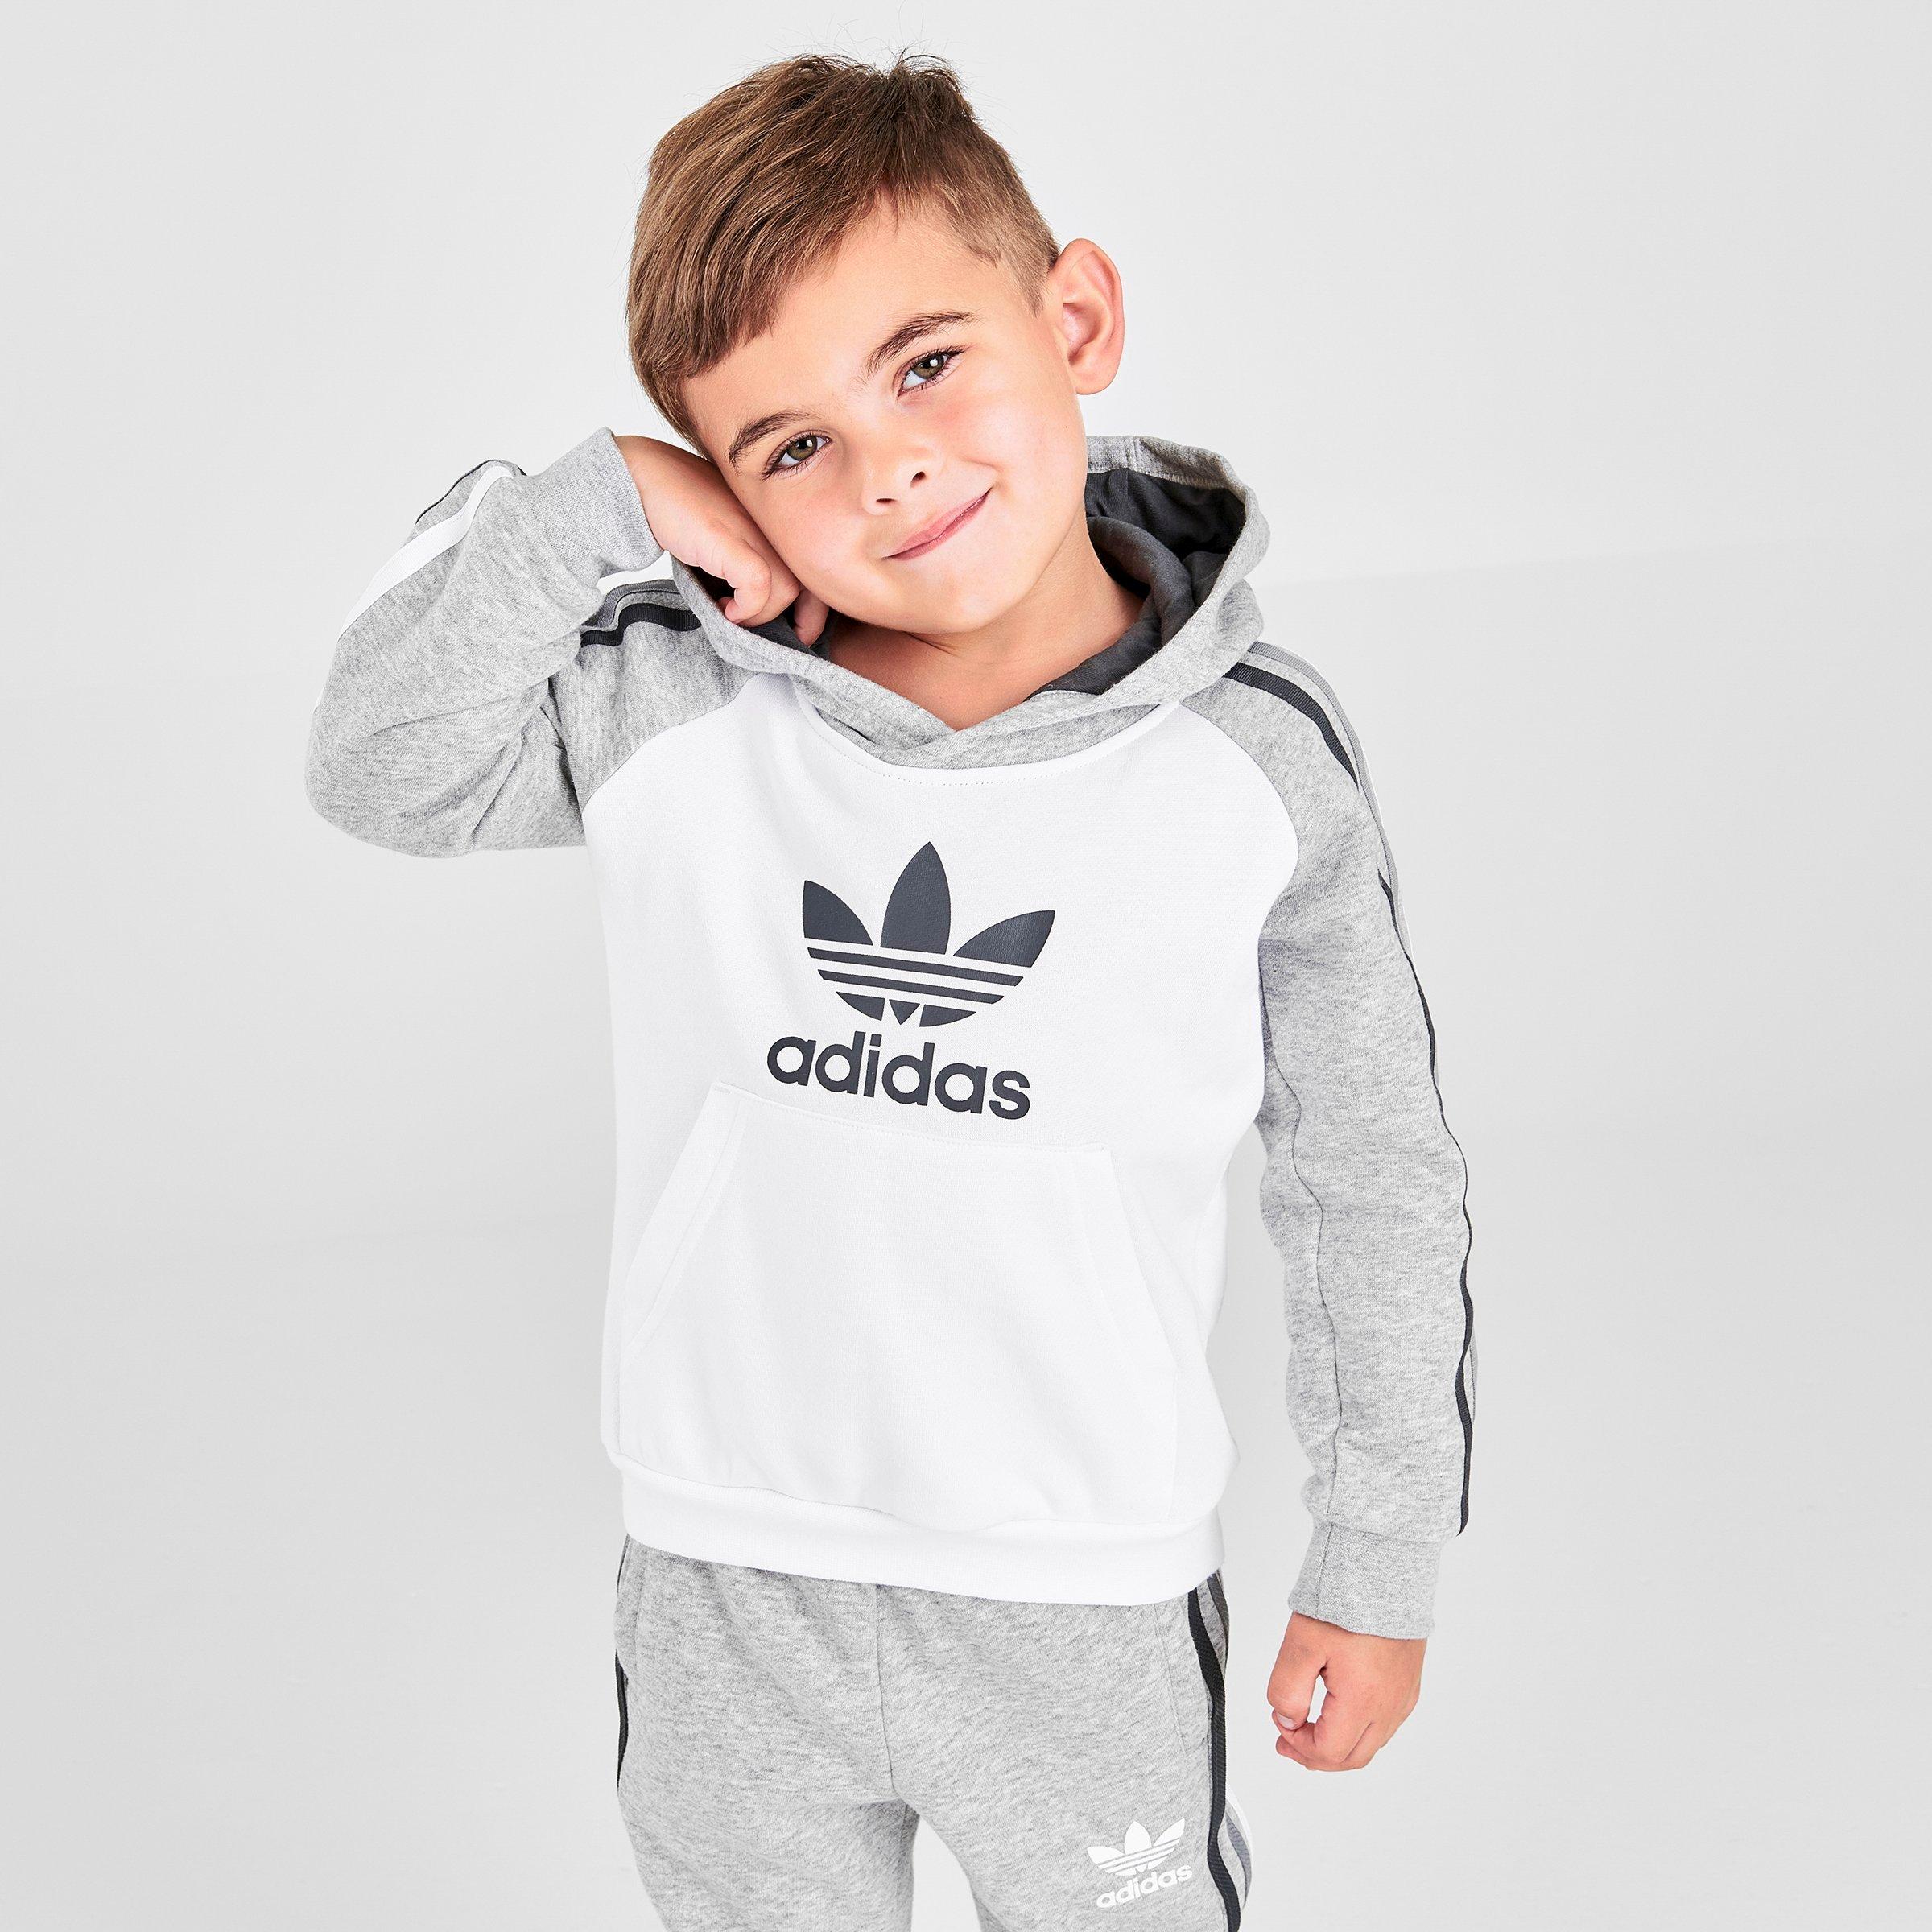 Boys' Toddler and Little Kids' adidas 3 